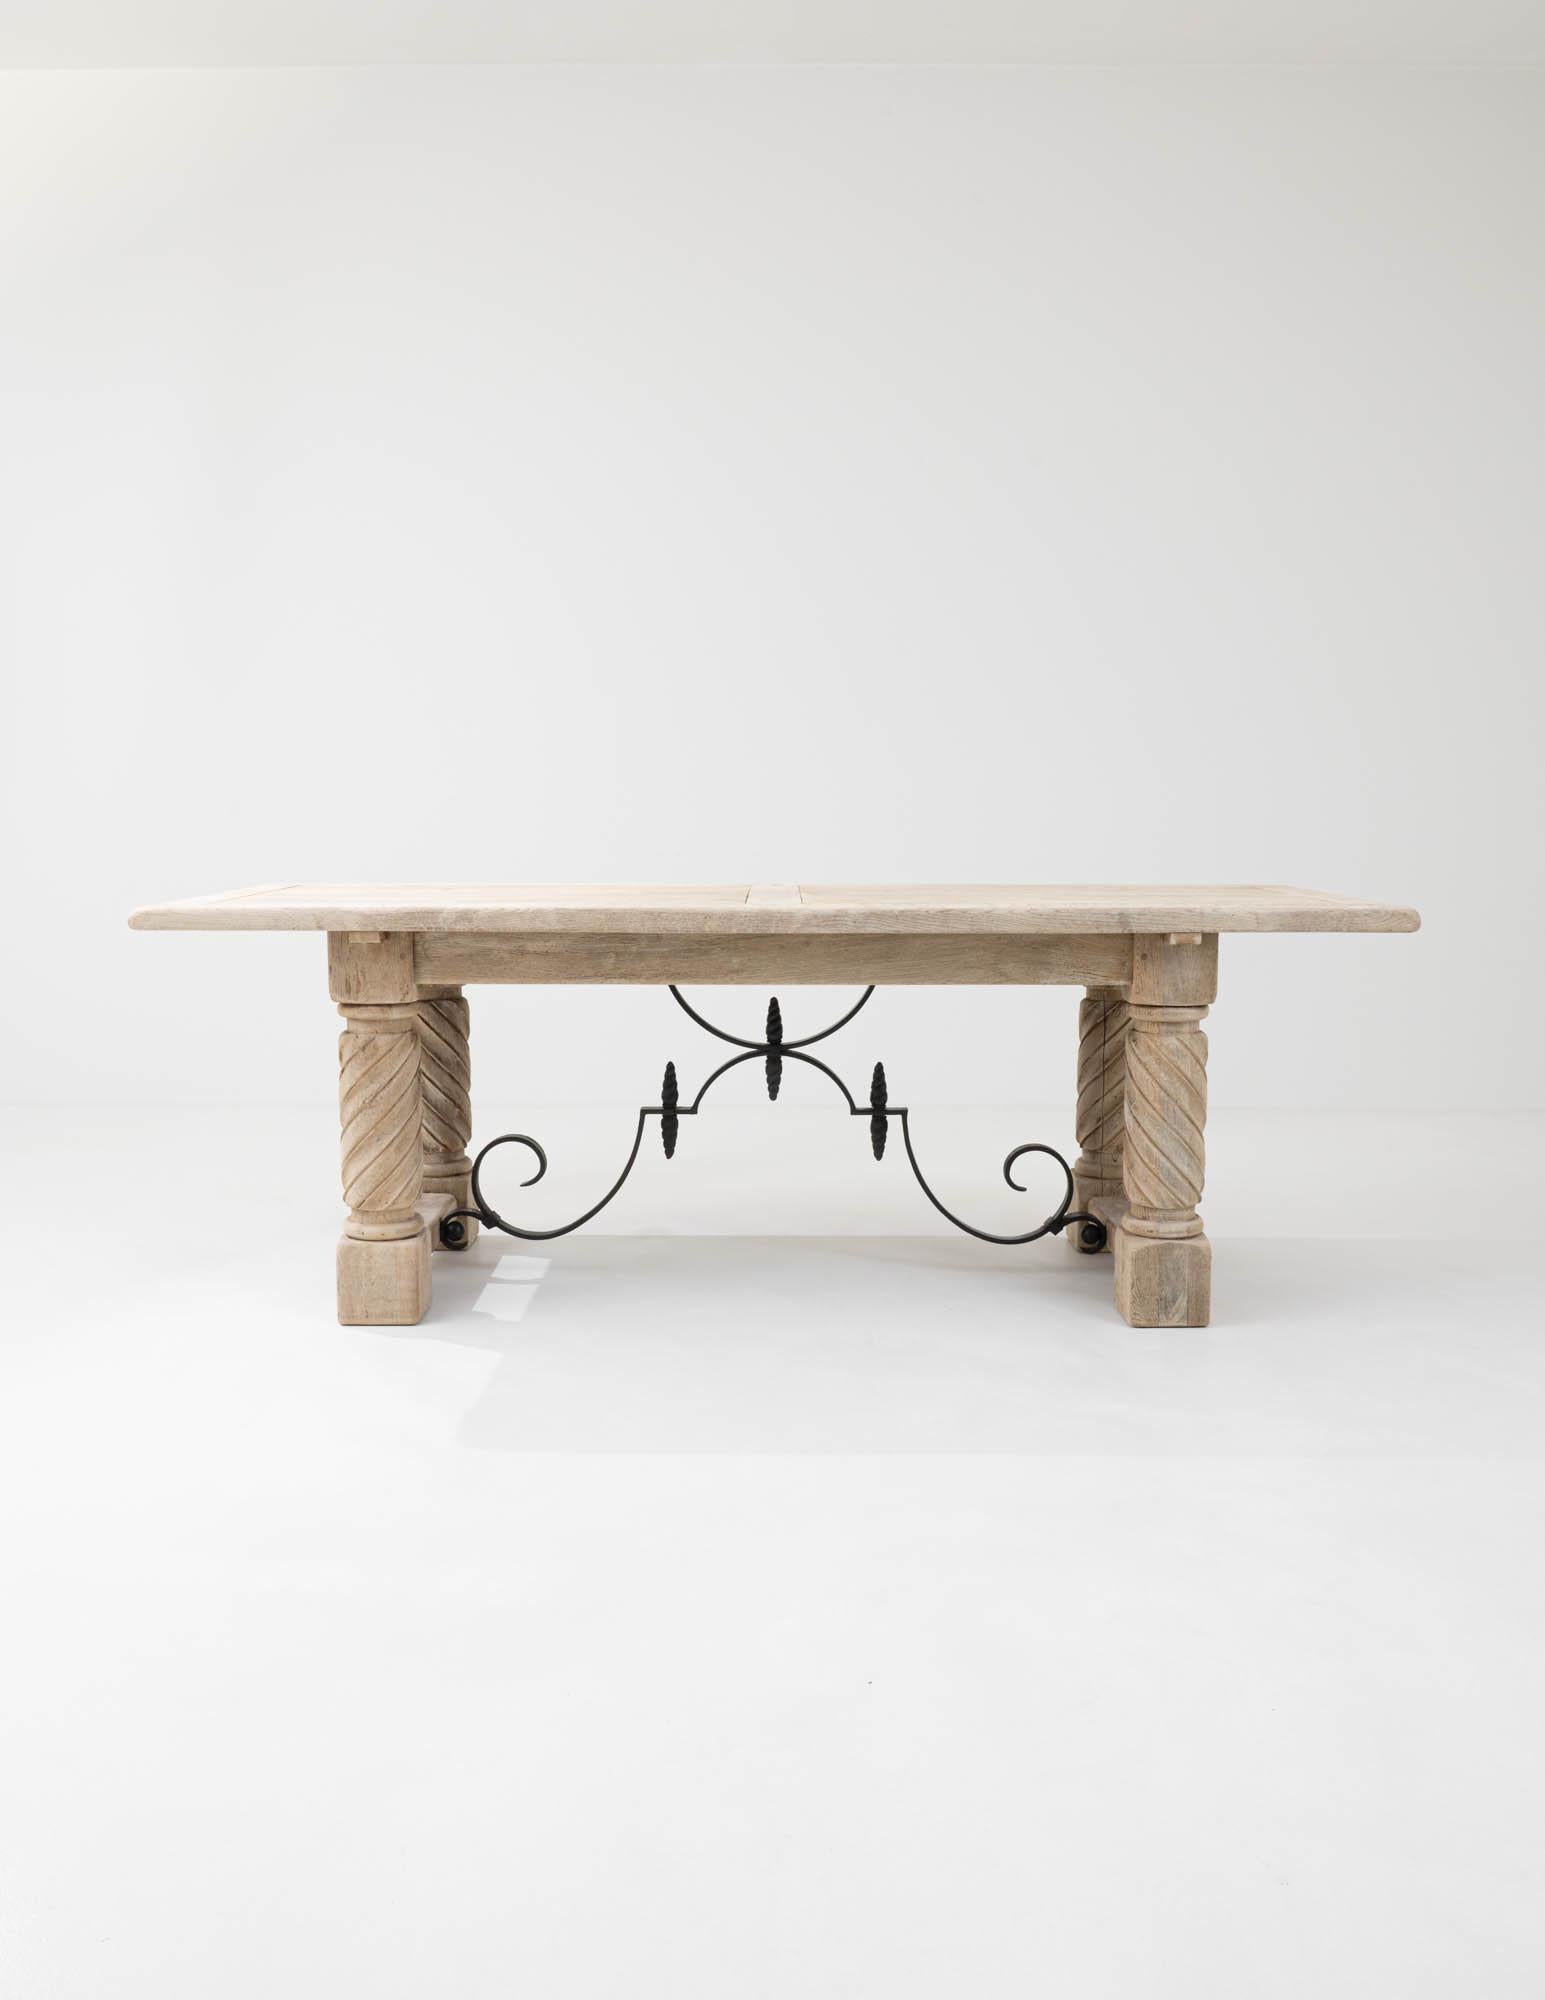 Philosopher Walter Benjamin described iron, steel, and glass as the signs of modernity and the march of progress as he witnessed the fin-de-siecle in Paris. This table, coming from early twentieth-century France is made of bleached oak with